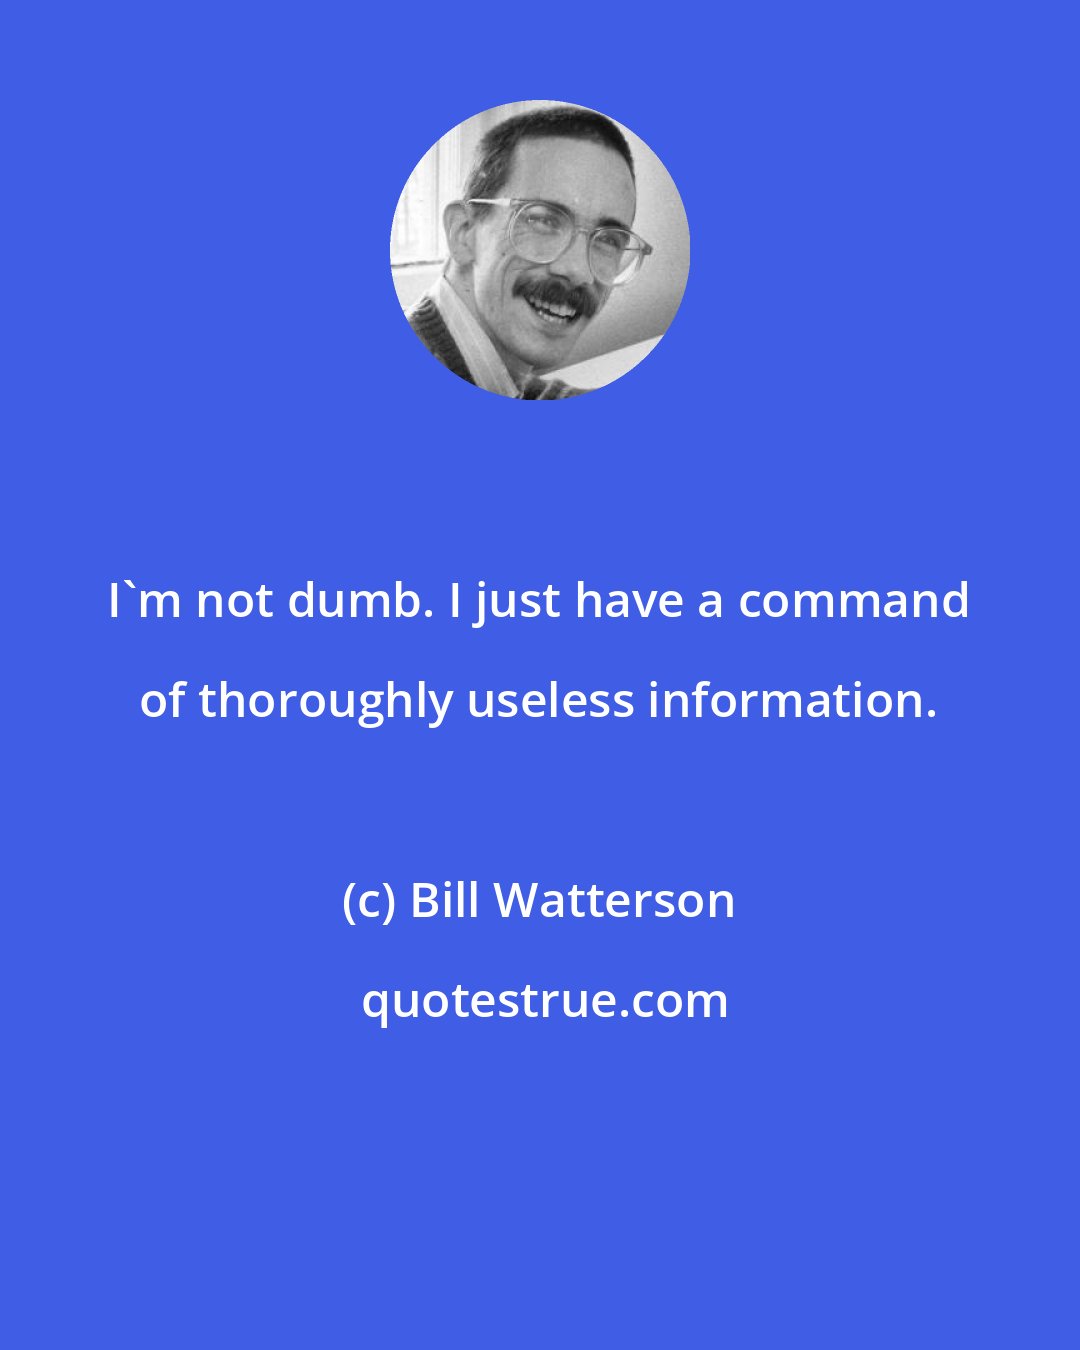 Bill Watterson: I'm not dumb. I just have a command of thoroughly useless information.